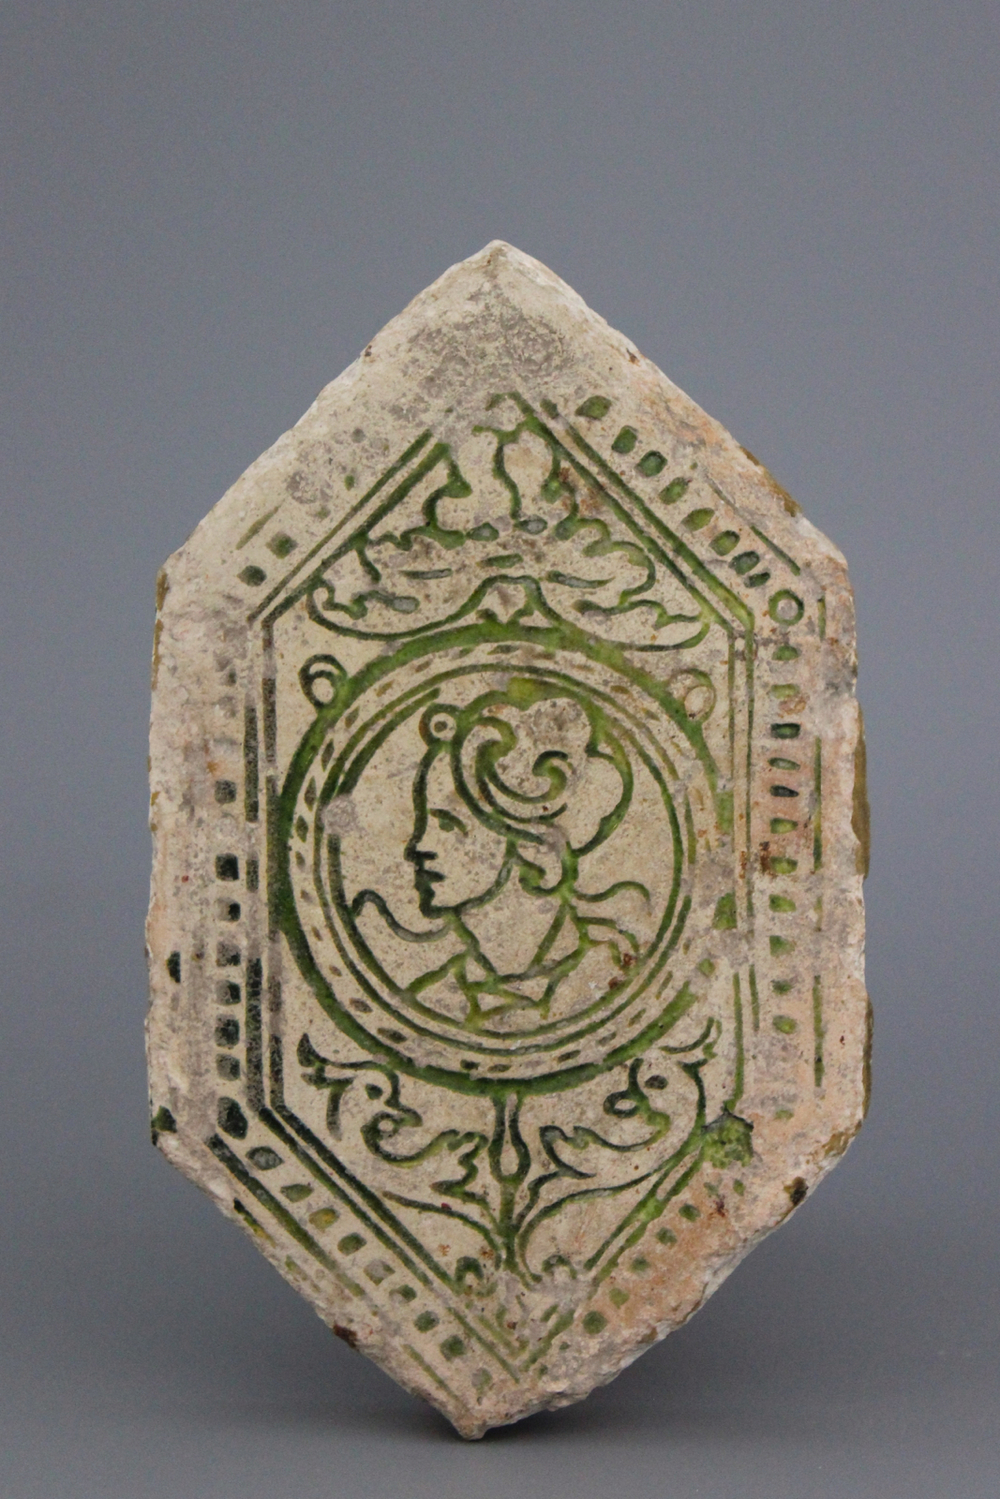 A French medieval hexagonal tile, ca. 1520